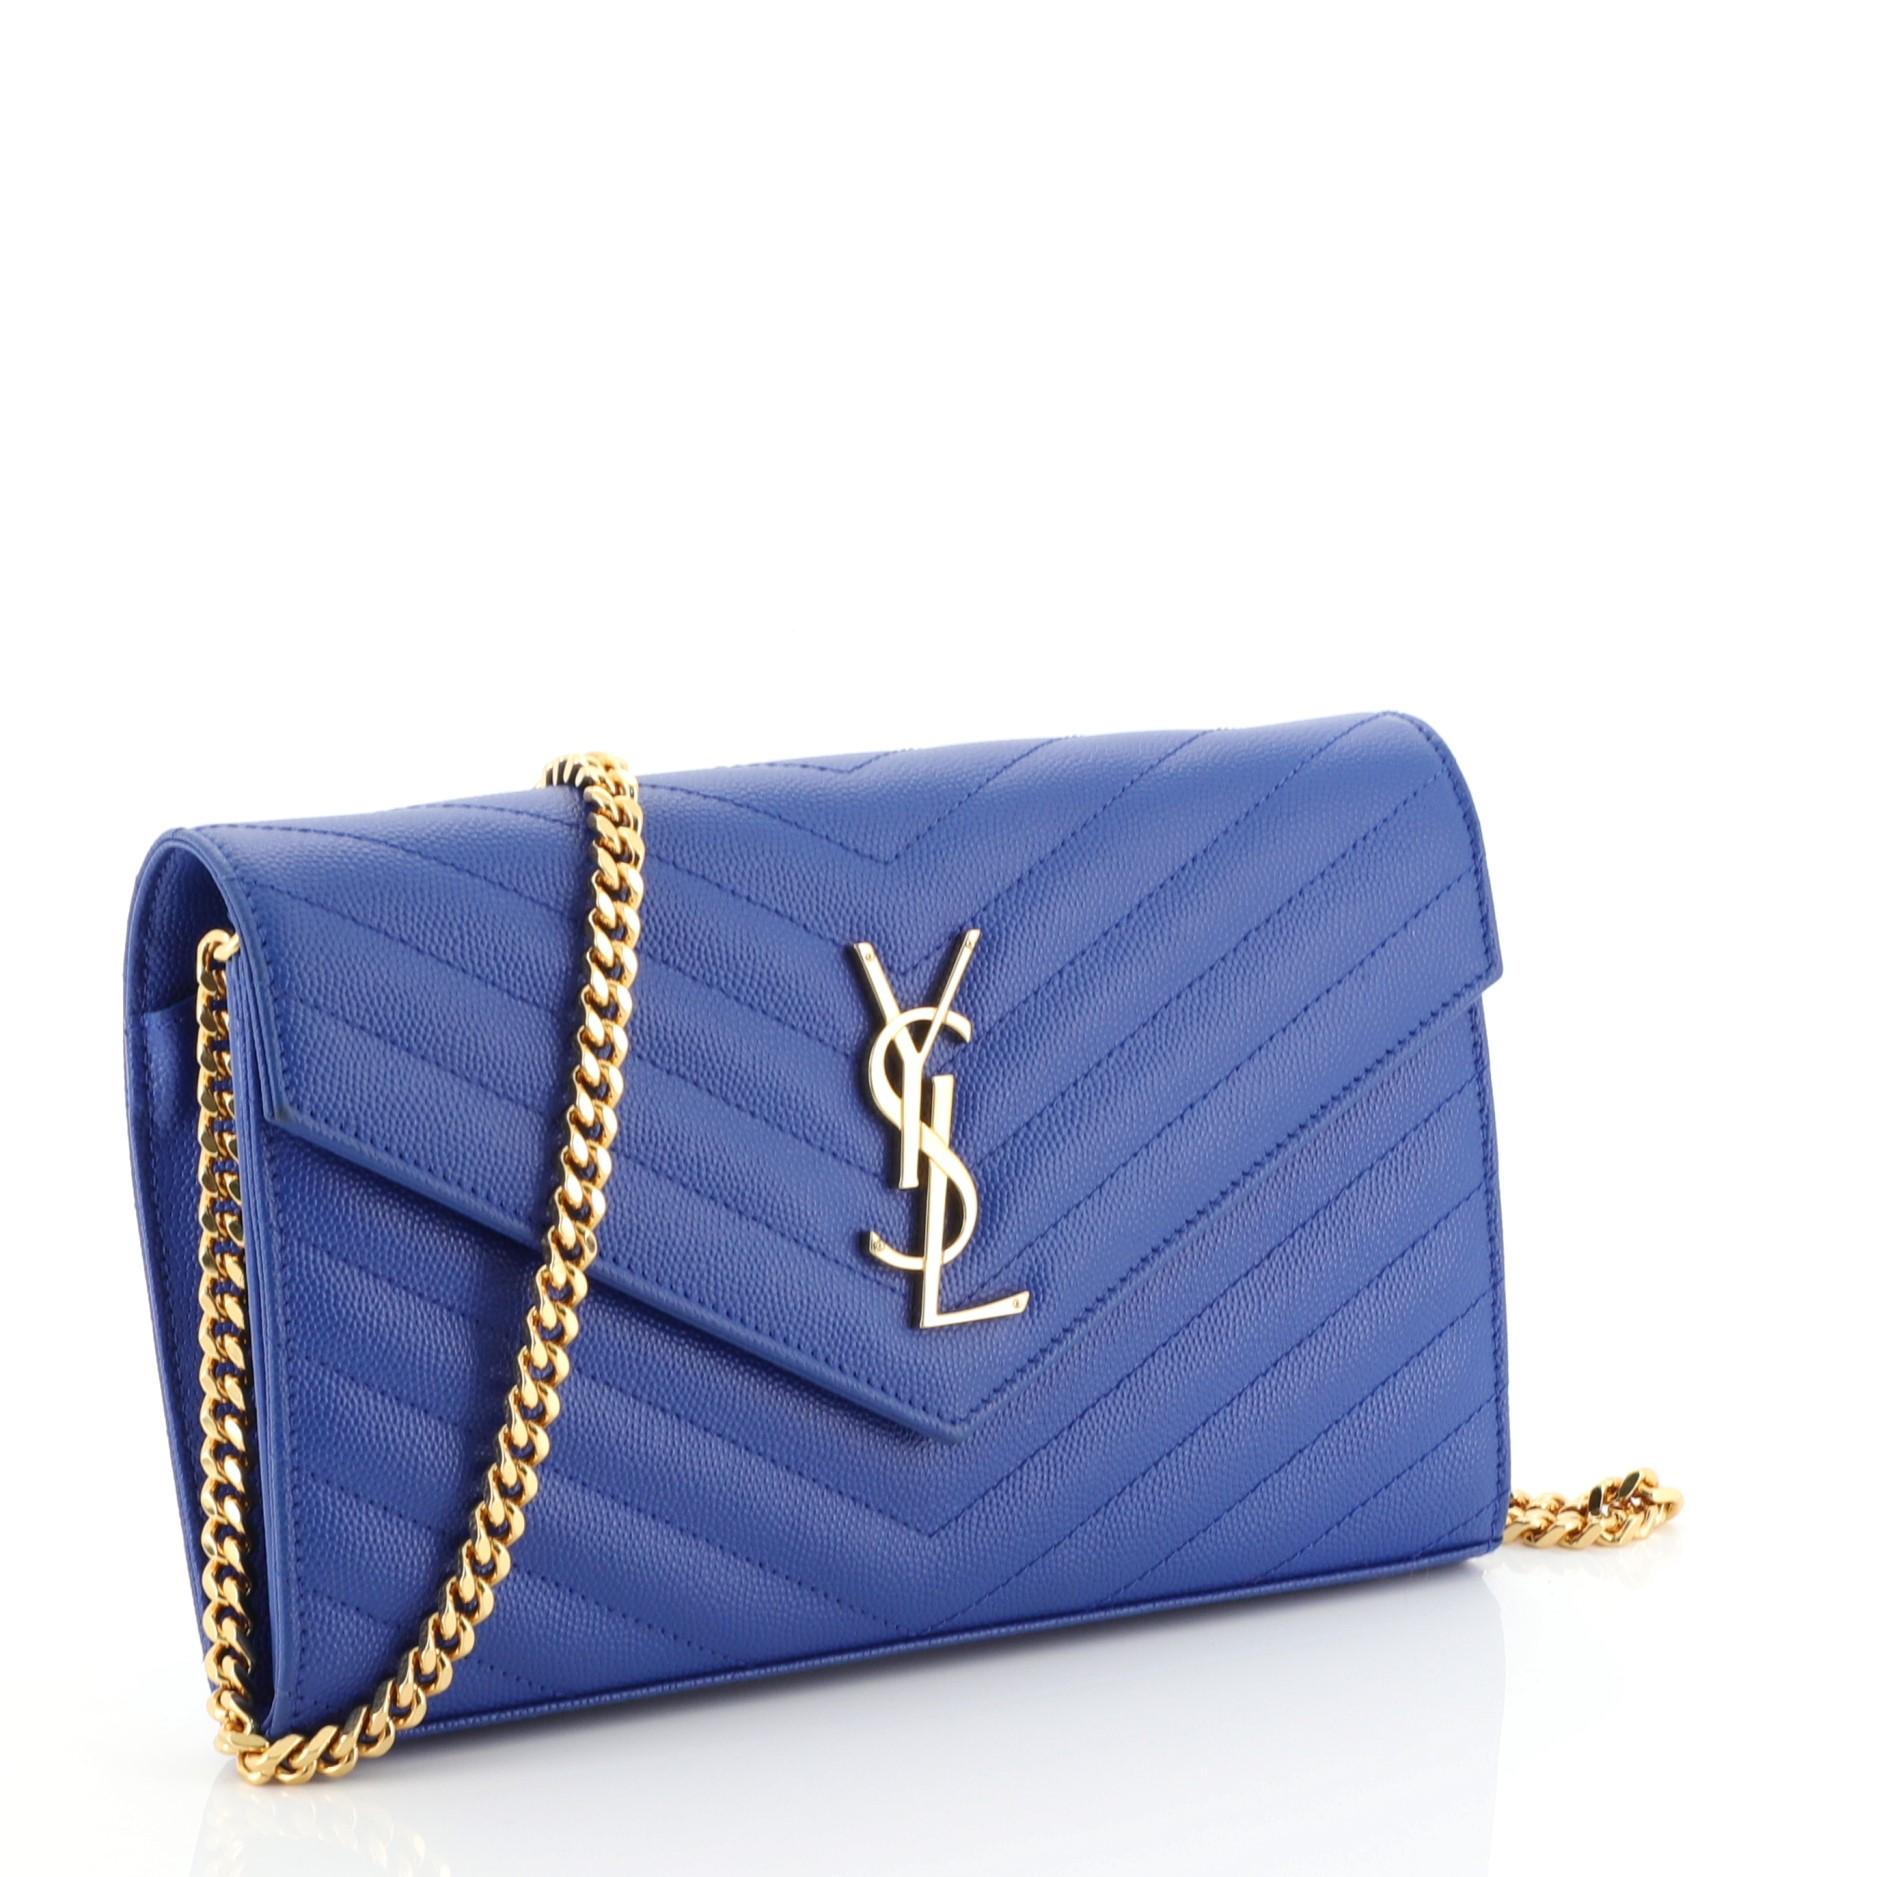 This Saint Laurent Classic Monogram Wallet on Chain Matelasse Chevron Leather Medium, crafted from blue matelasse chevron leather, features chain link strap, YSL monogram logo at the front, and gold-tone hardware. Its snap closure opens to a black